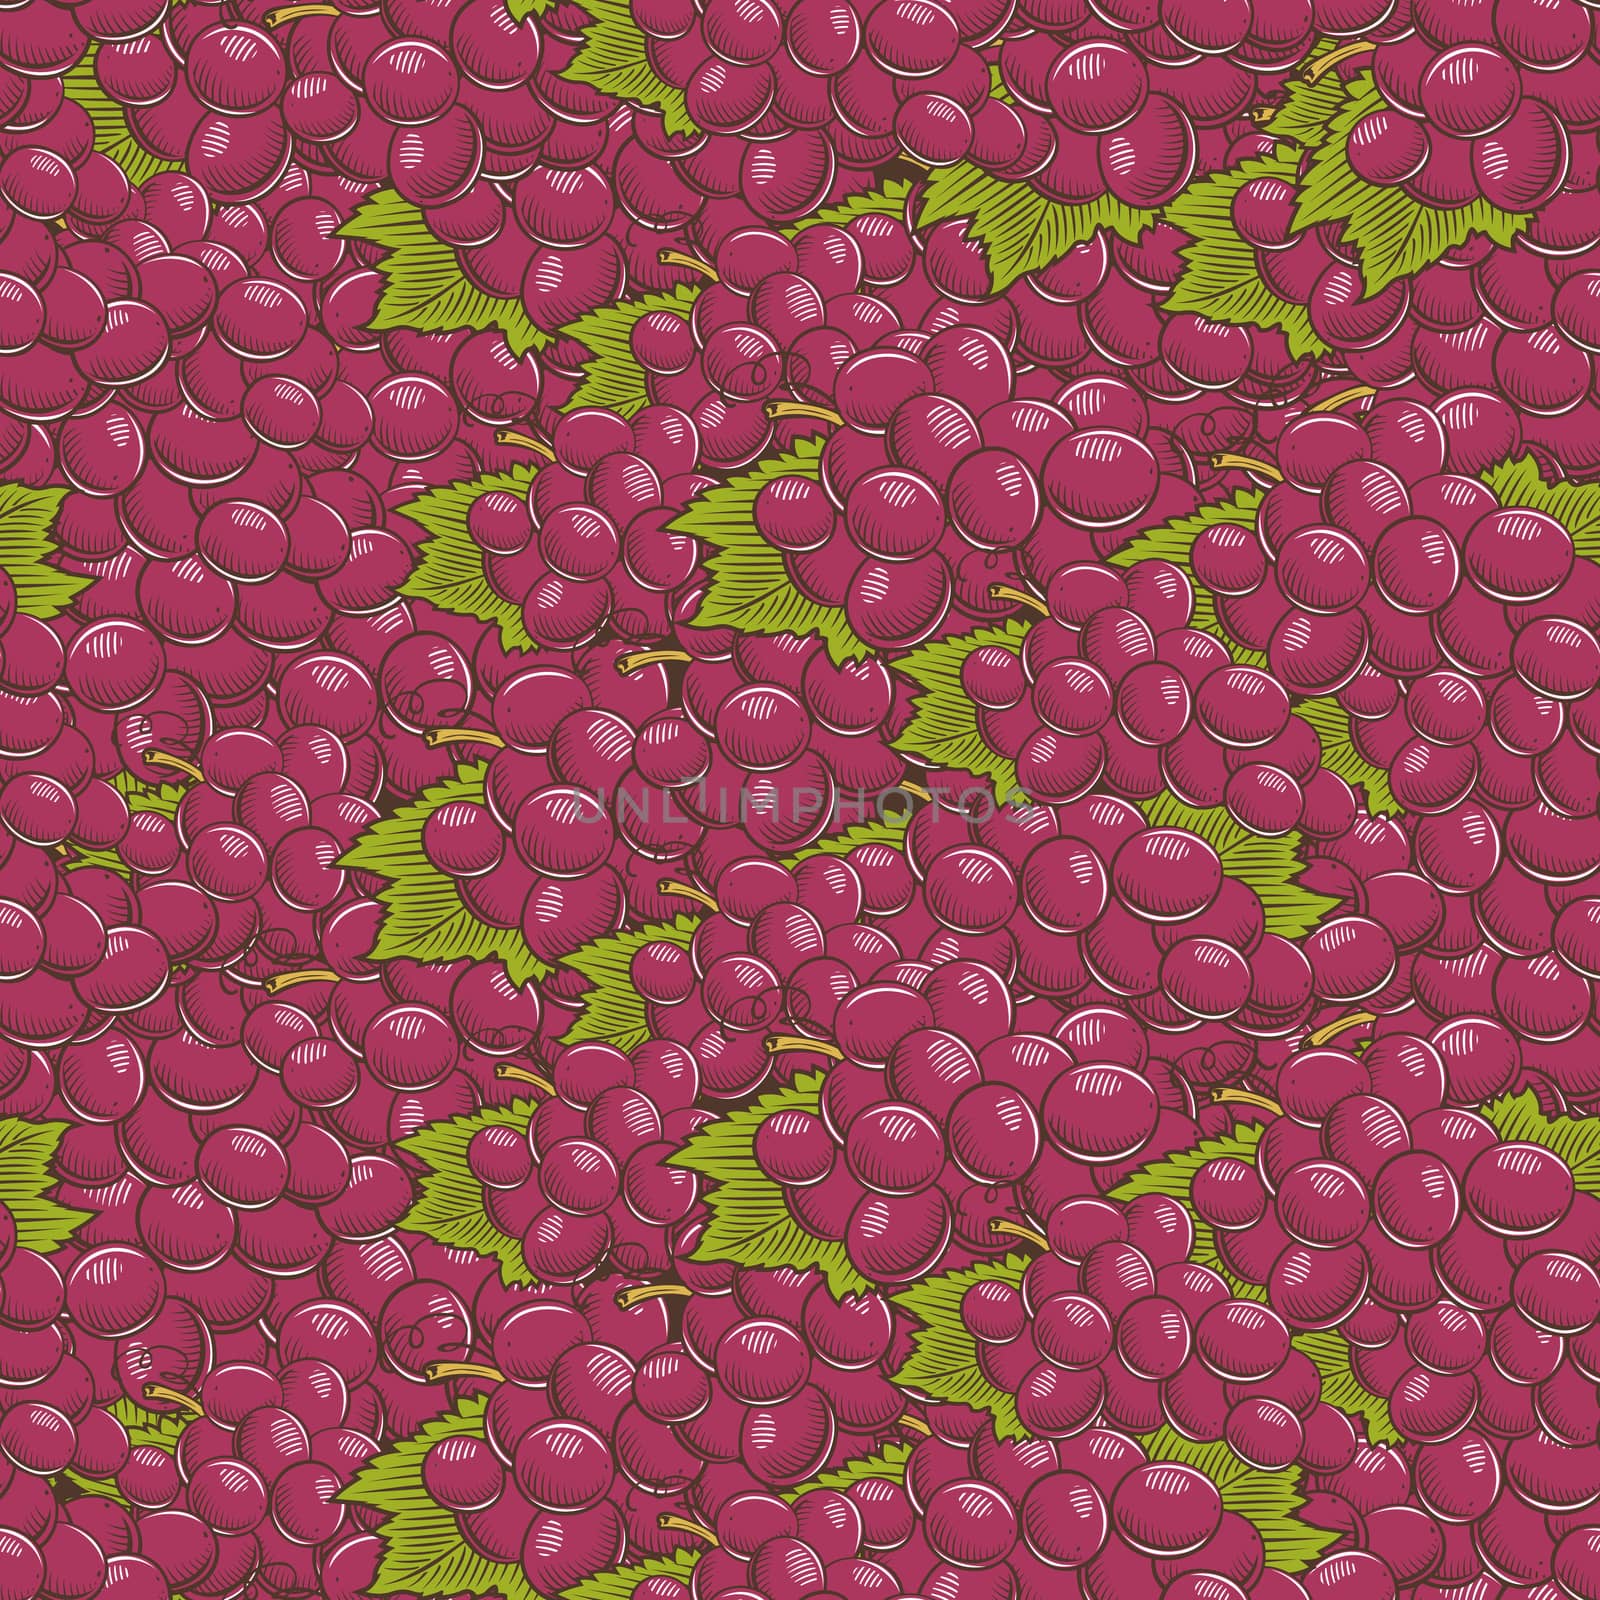 Vintage Red Grapes Seamless Pattern by ConceptCafe